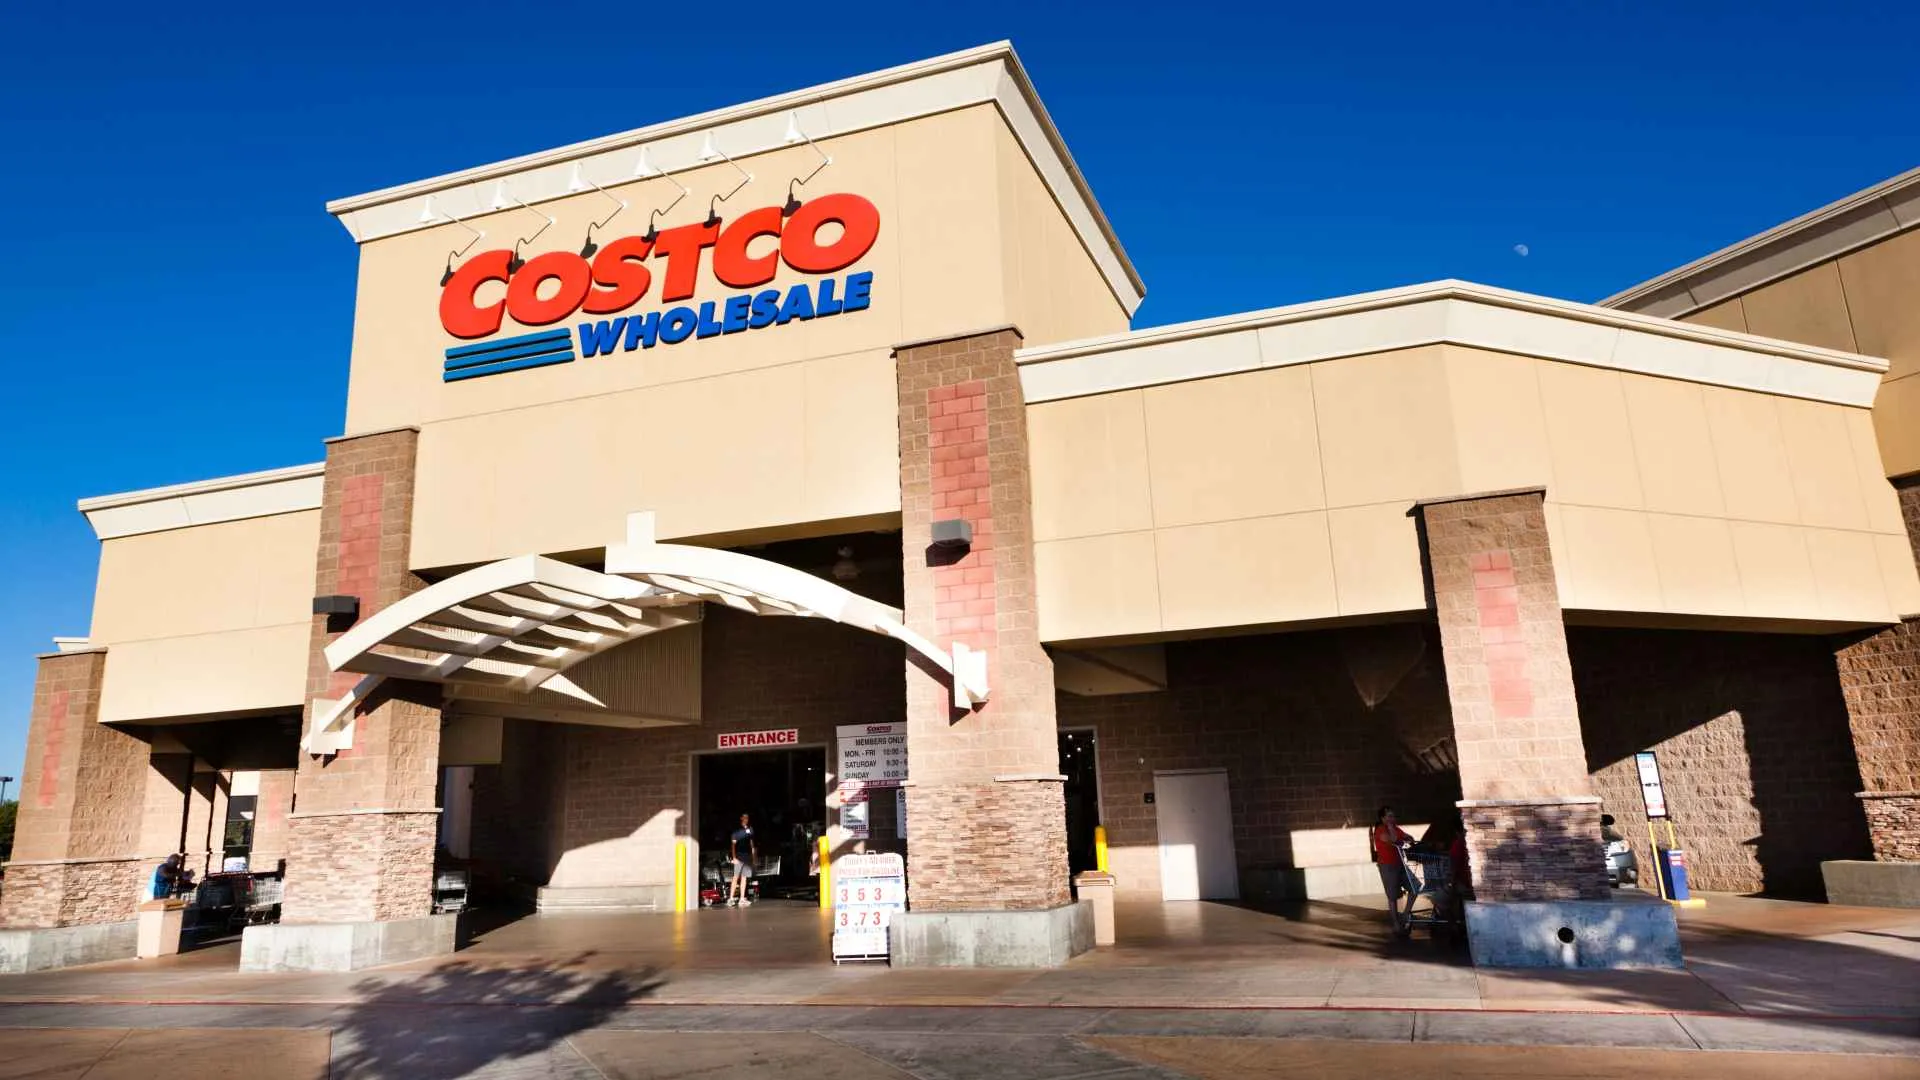 Get Costco's Best Deals With This Expert Advice